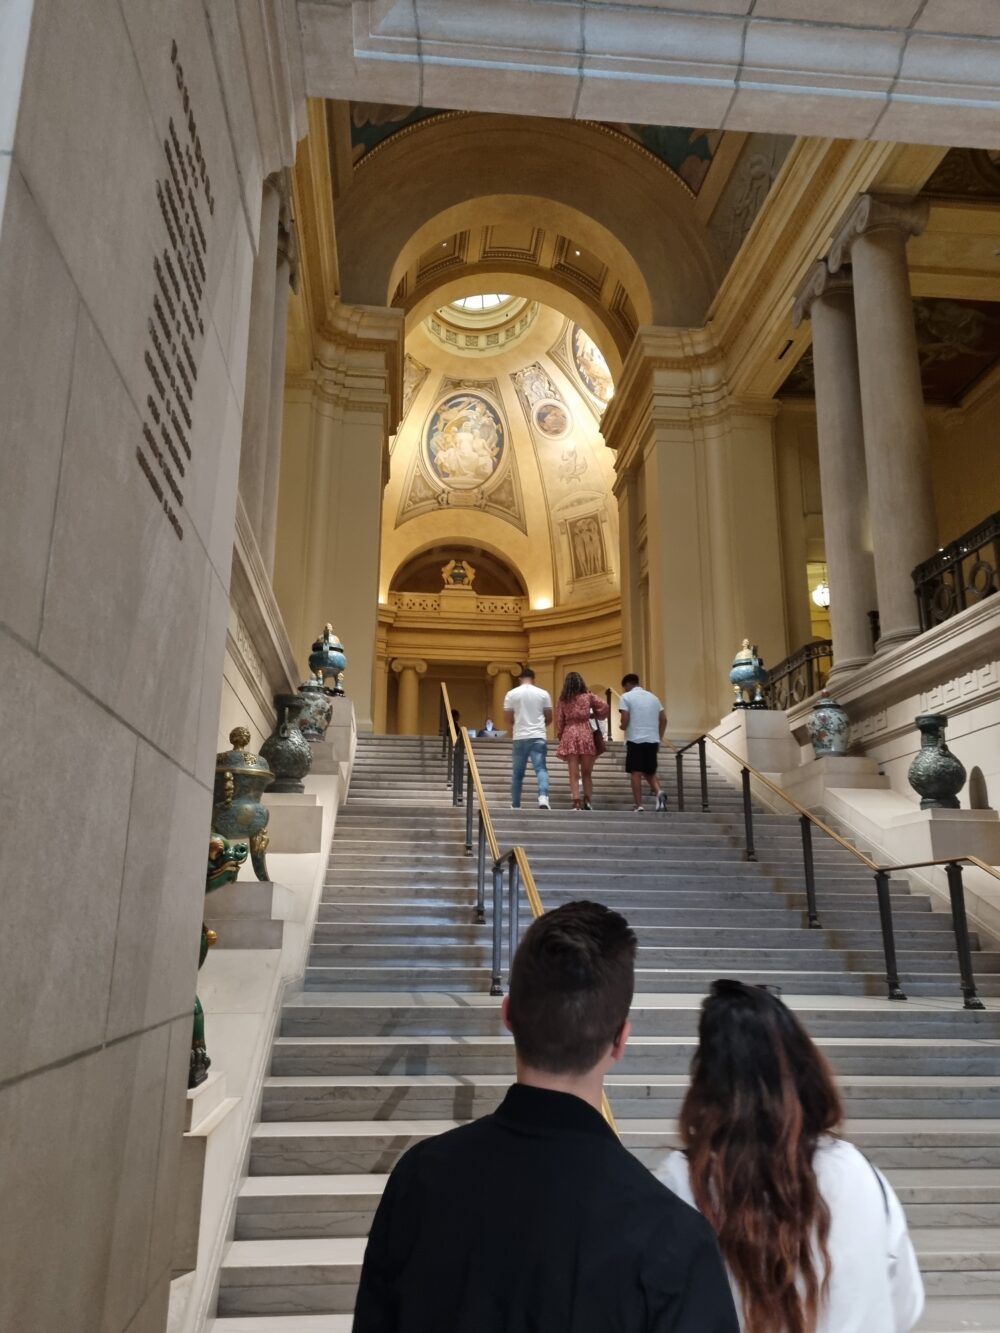 Interior stairway in the Boston Museum of Fine Arts. Two individuals have their backs turned to the camera and look up the staircase which is lined with ancient vases and leads to a bright rotunda.